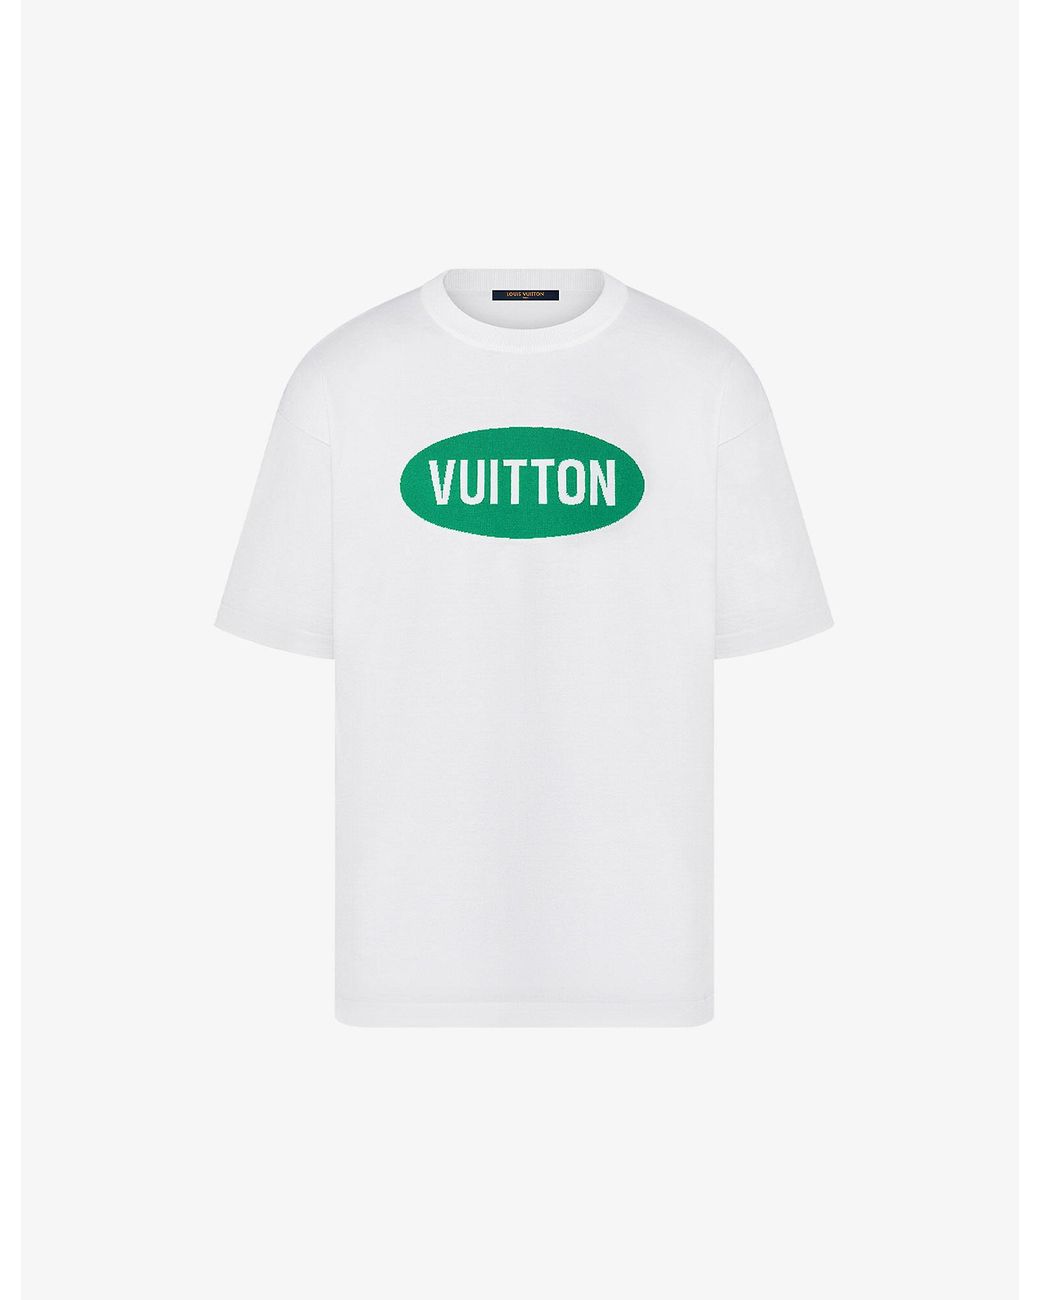 LV House Printed T-Shirt - Ready to Wear